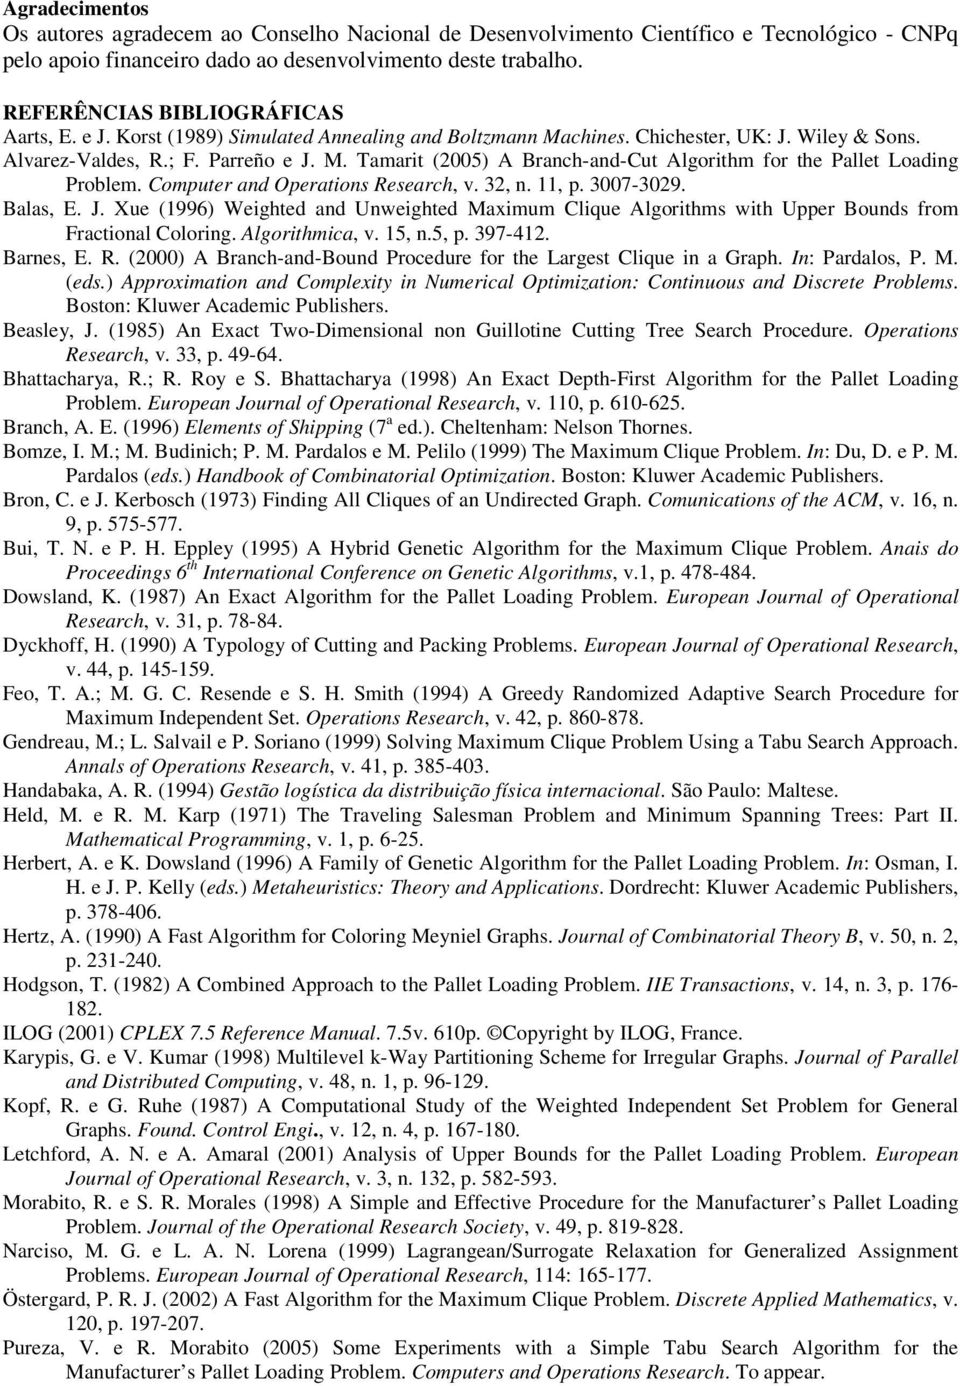 Computer and Operations Research, v. 32, n. 11, p. 3007-3029. Balas, E. J. Xue (1996) Weighted and Unweighted Maximum Clique Algorithms with Upper Bounds from Fractional Coloring. Algorithmica, v.